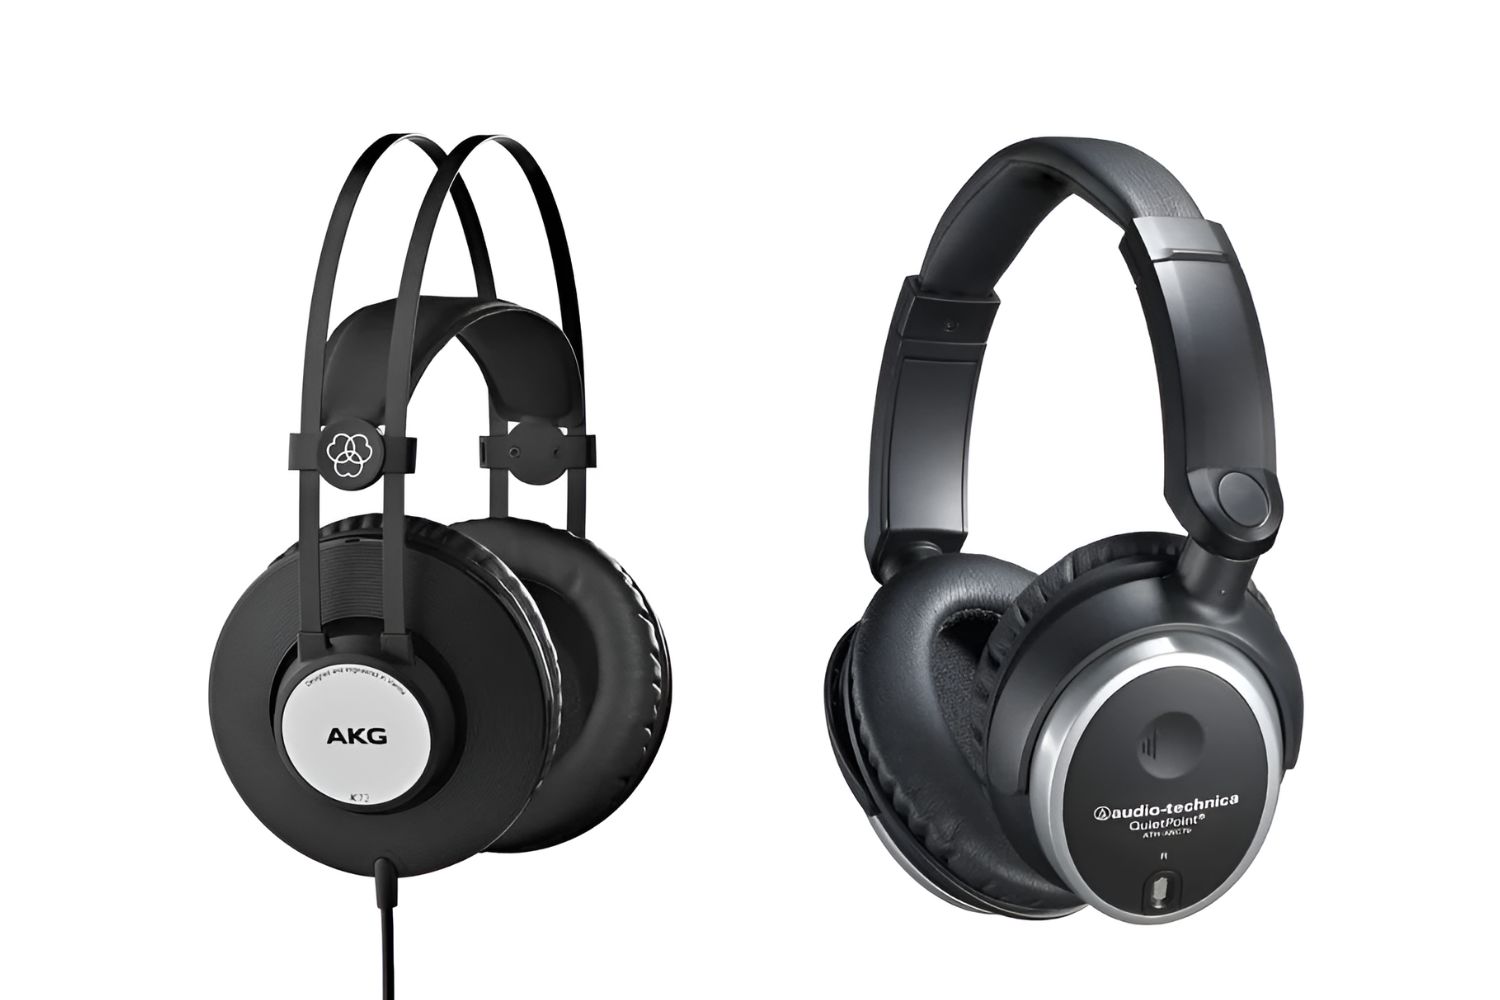 What Is The Difference Between Active And Passive Noise Cancelling Headphones?